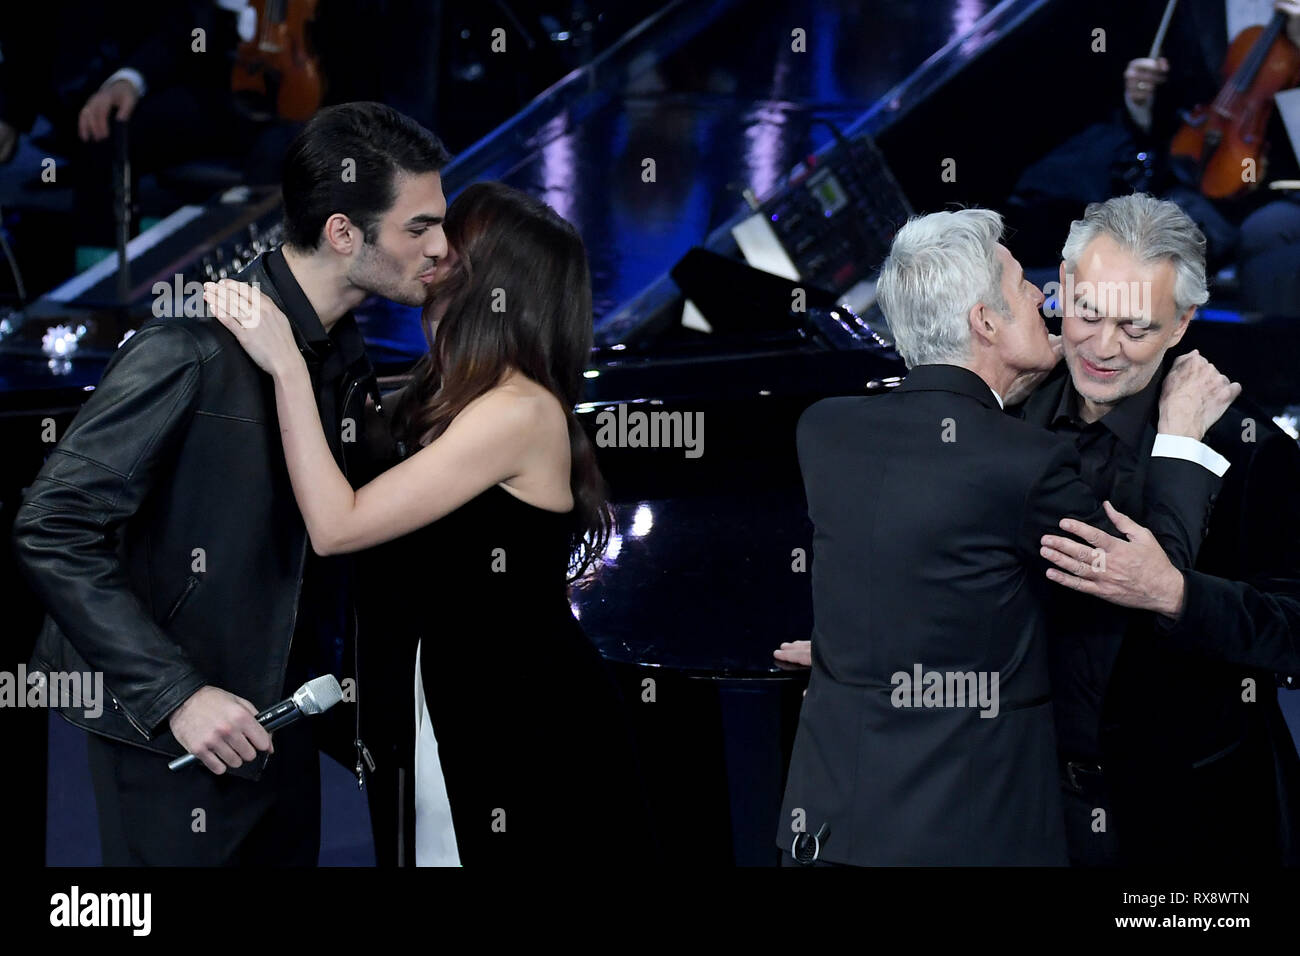 First evening of the 69th Annual Sanremo Festival of Italian Song held at Teatro Ariston of Sanremo  Featuring: Andrea Bocelli, Claudio Baglioni, Virginia Raffaele, Matteo Bocelli Where: Sanremo, Italy When: 05 Feb 2019 Credit: IPA/WENN.com  **Only available for publication in UK, USA, Germany, Austria, Switzerland** Stock Photo